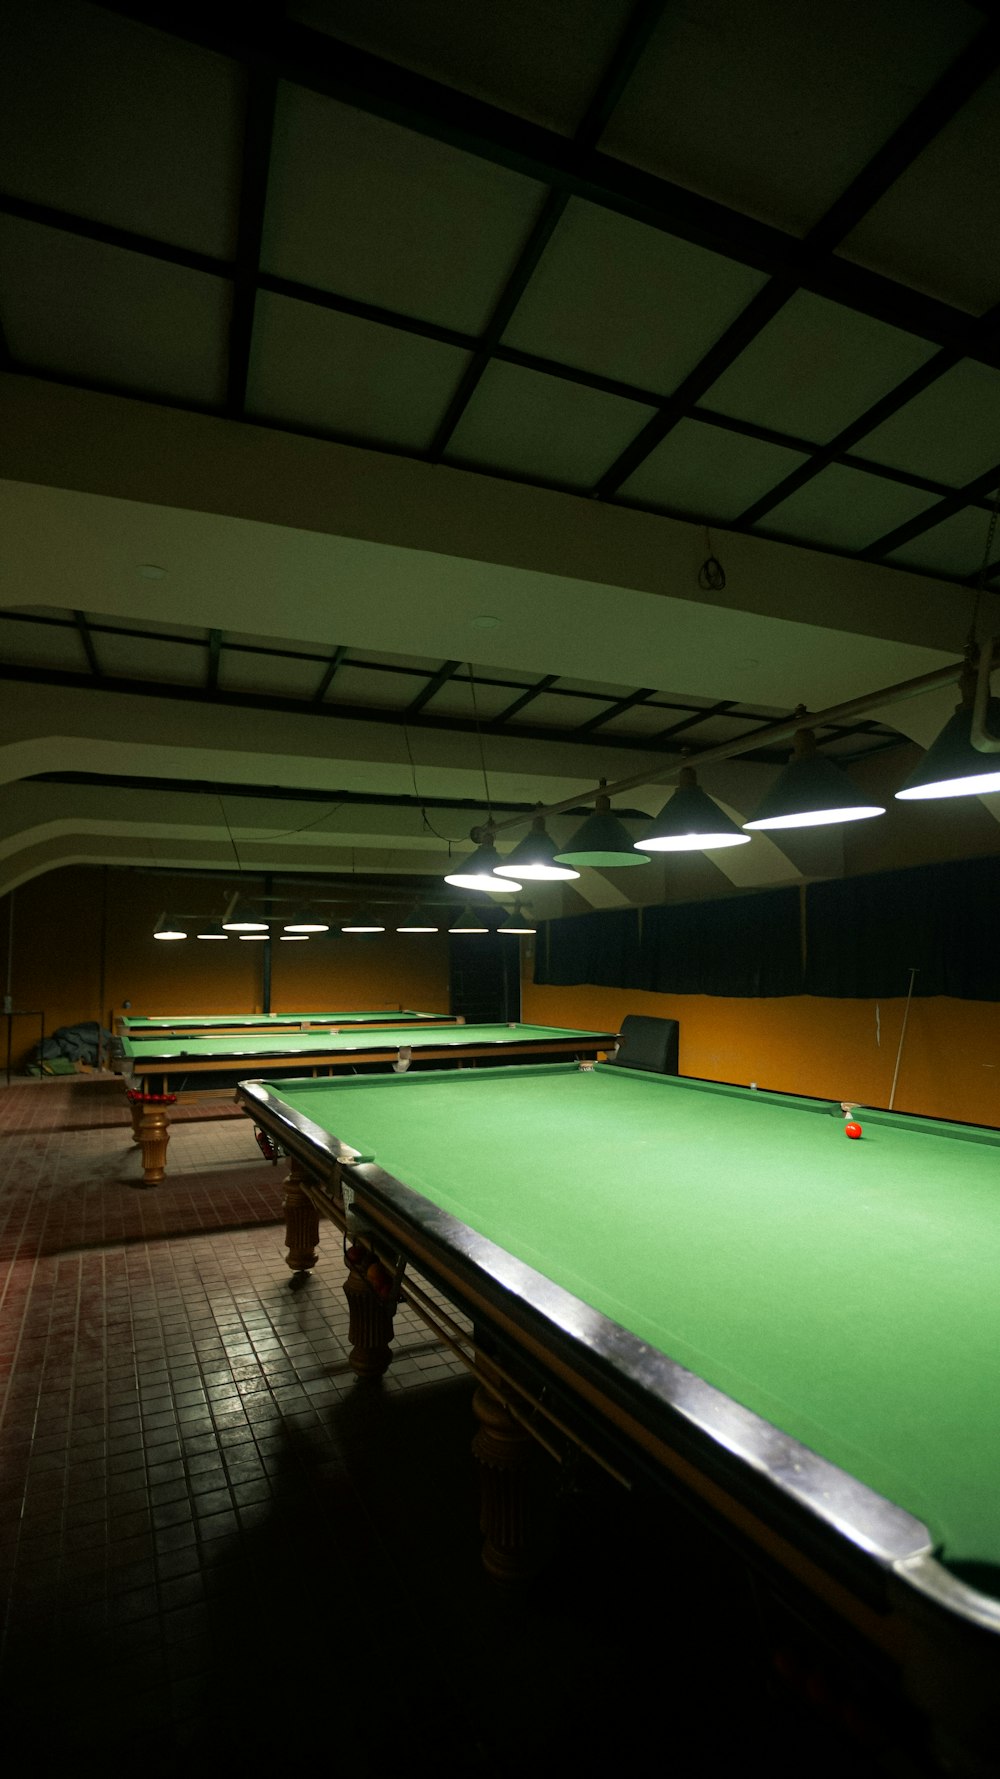 a green pool table in a dark room